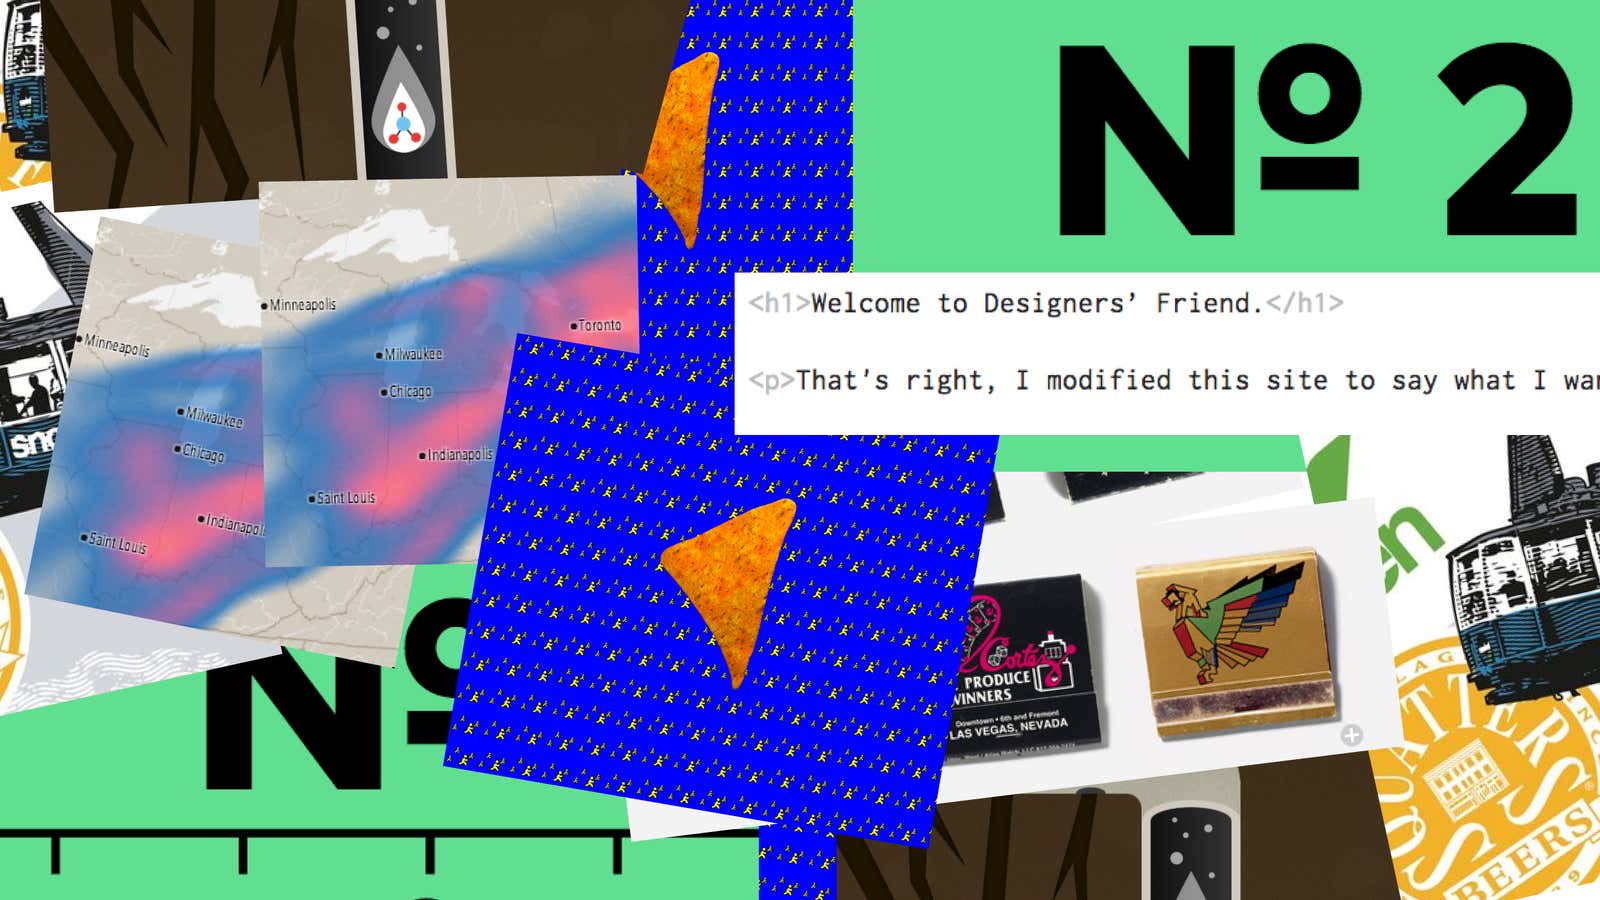 Our favorite web design of 2013